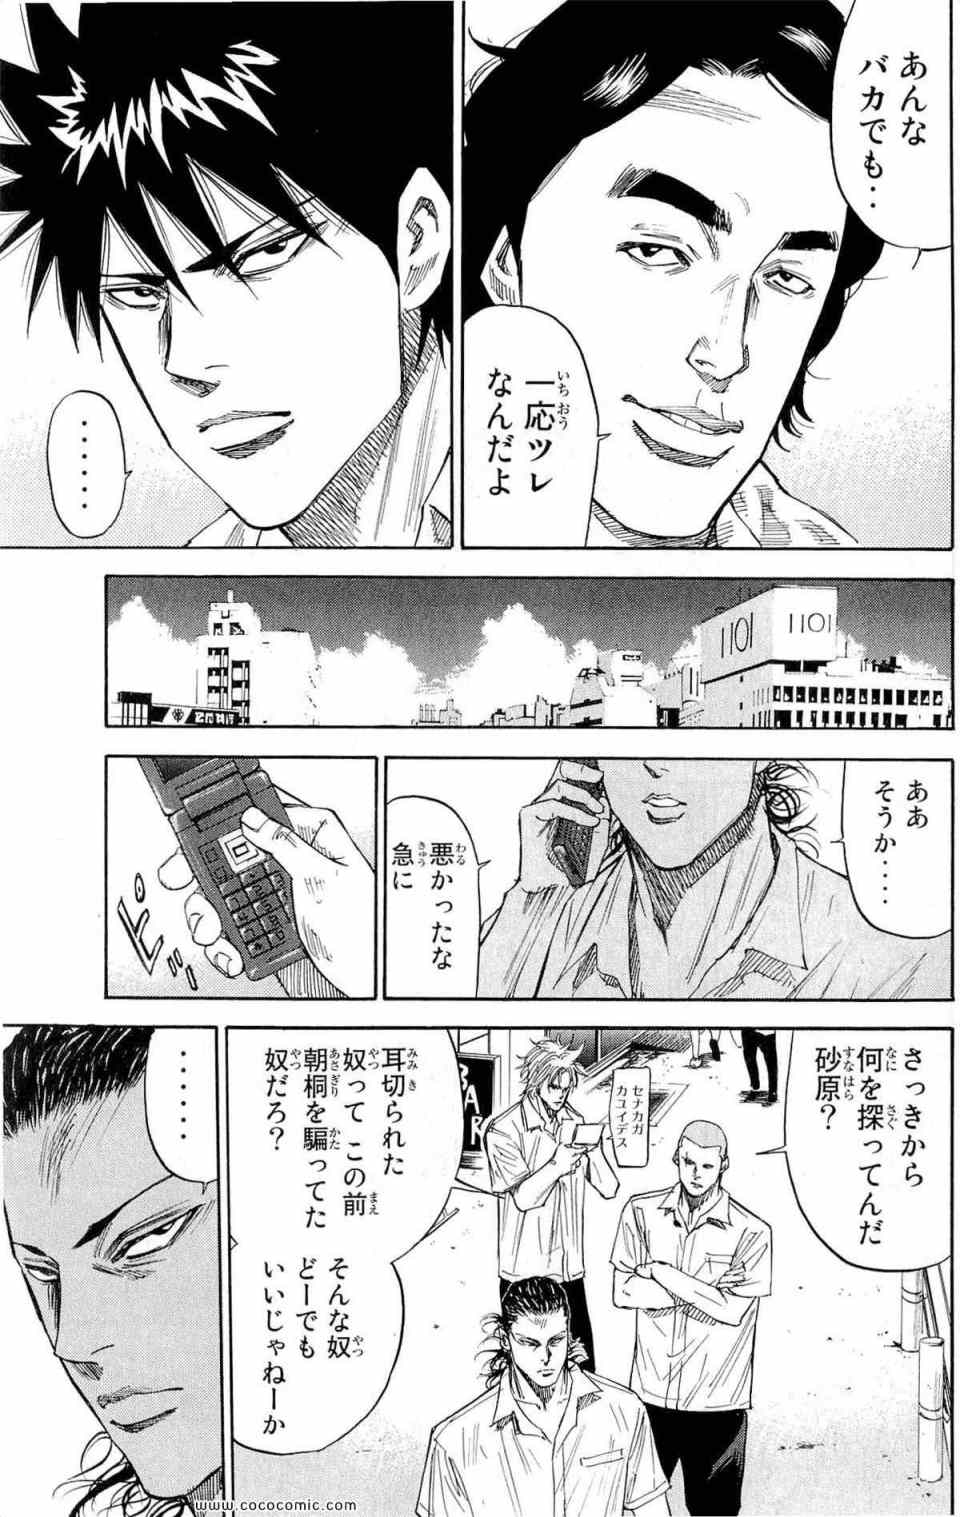 《A-BOUT!(日文)》漫画 A-BOUT! 05卷